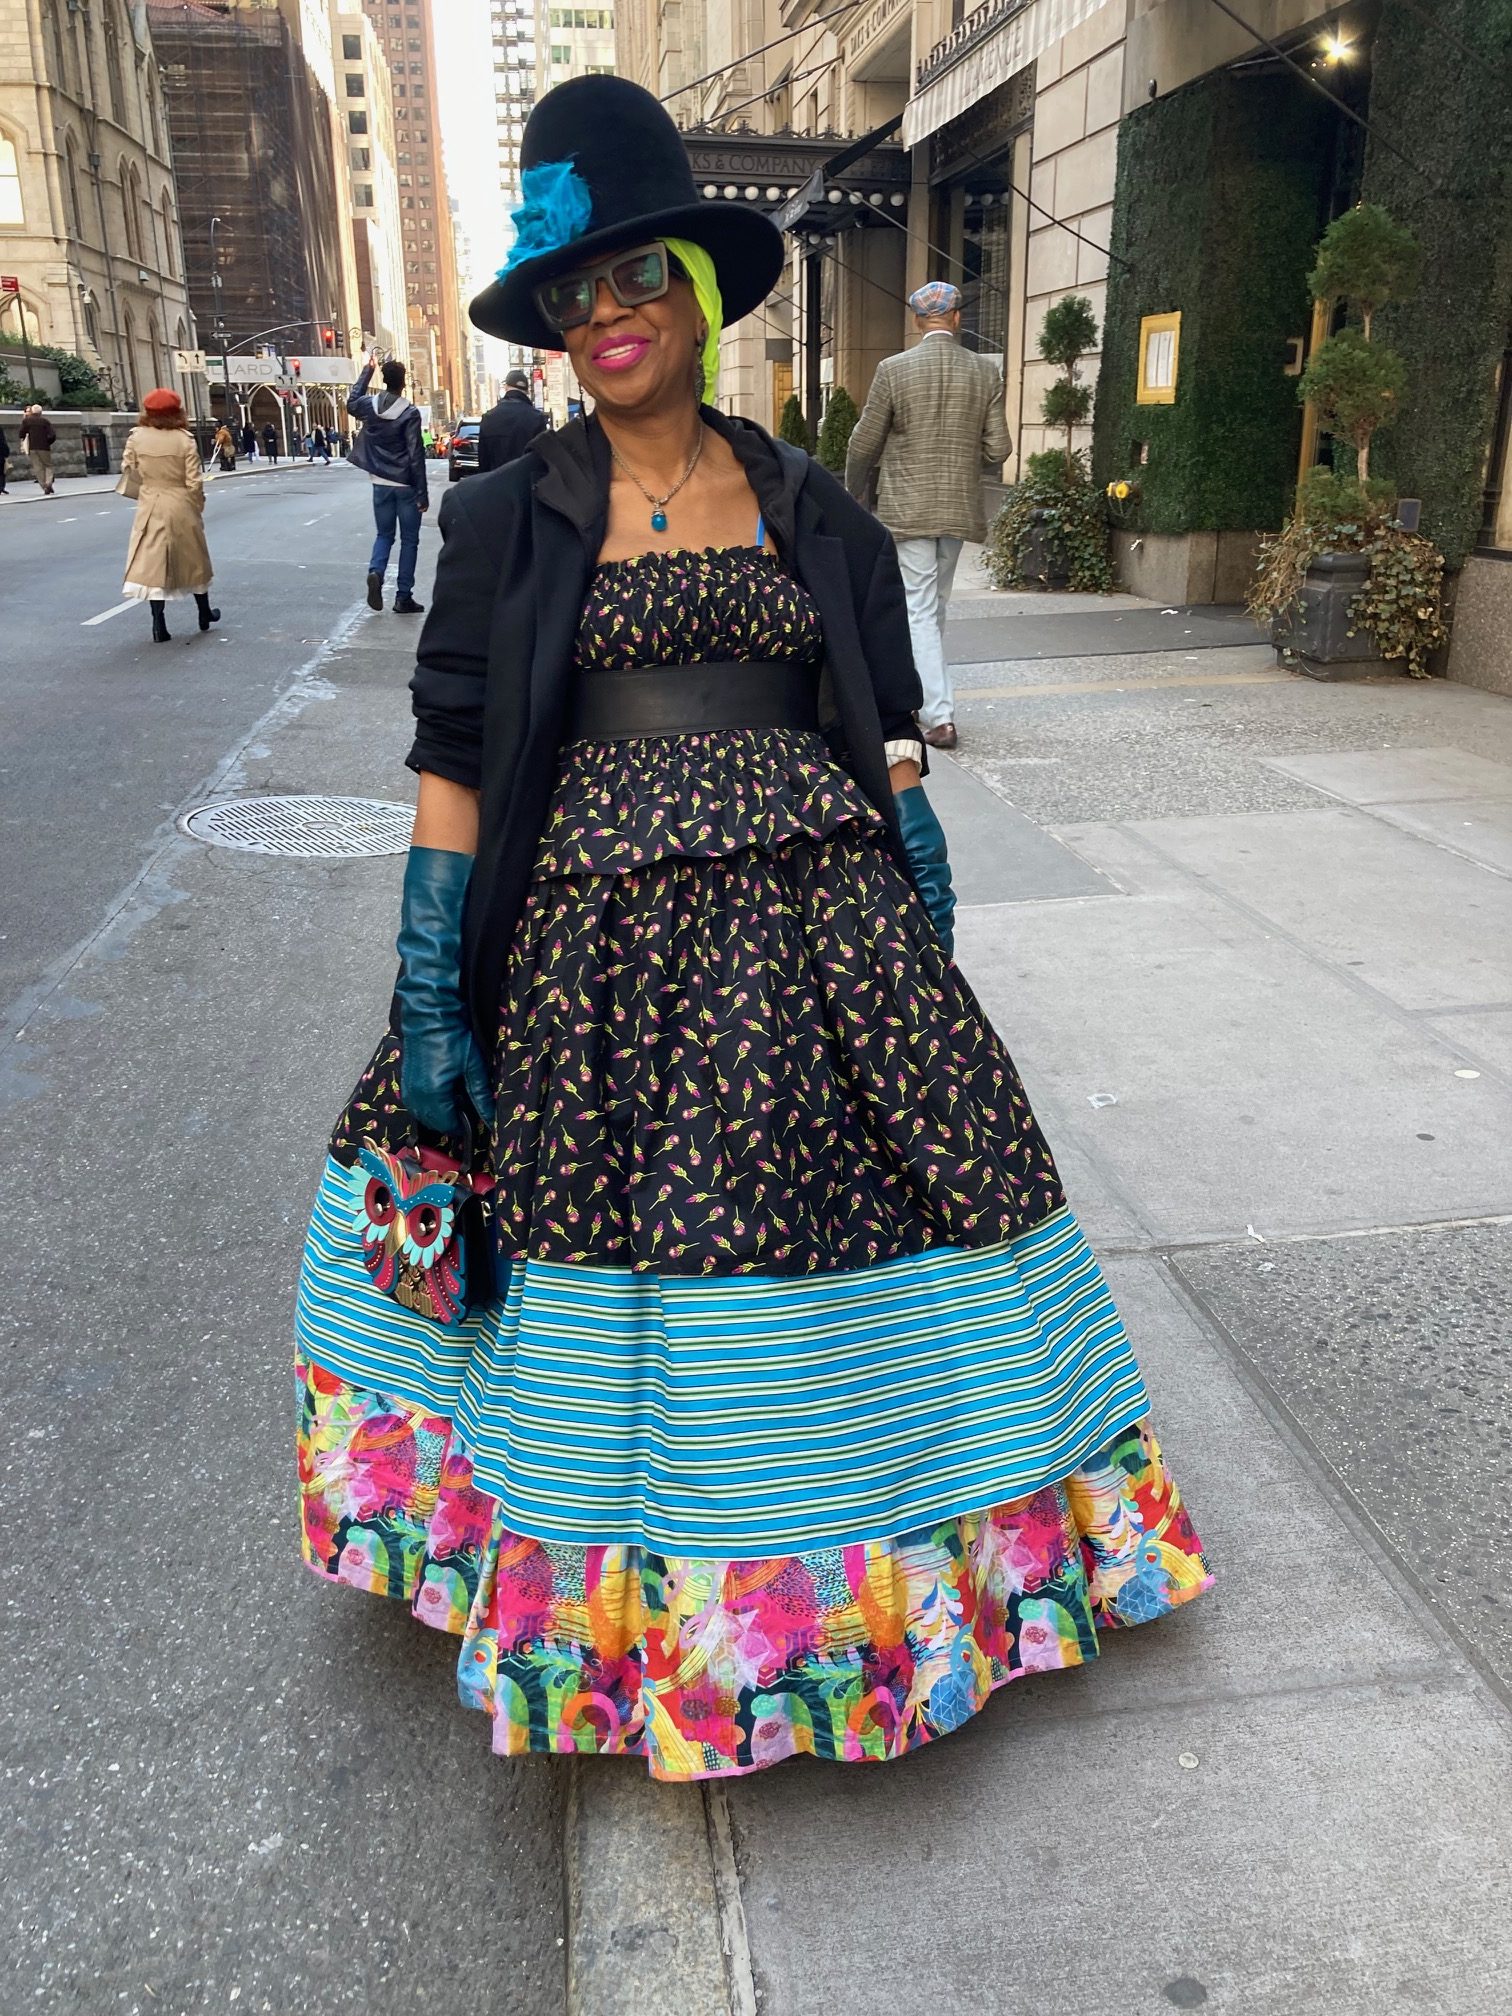 Beautiful Fashions @ The Easter Parade 2023 in New York